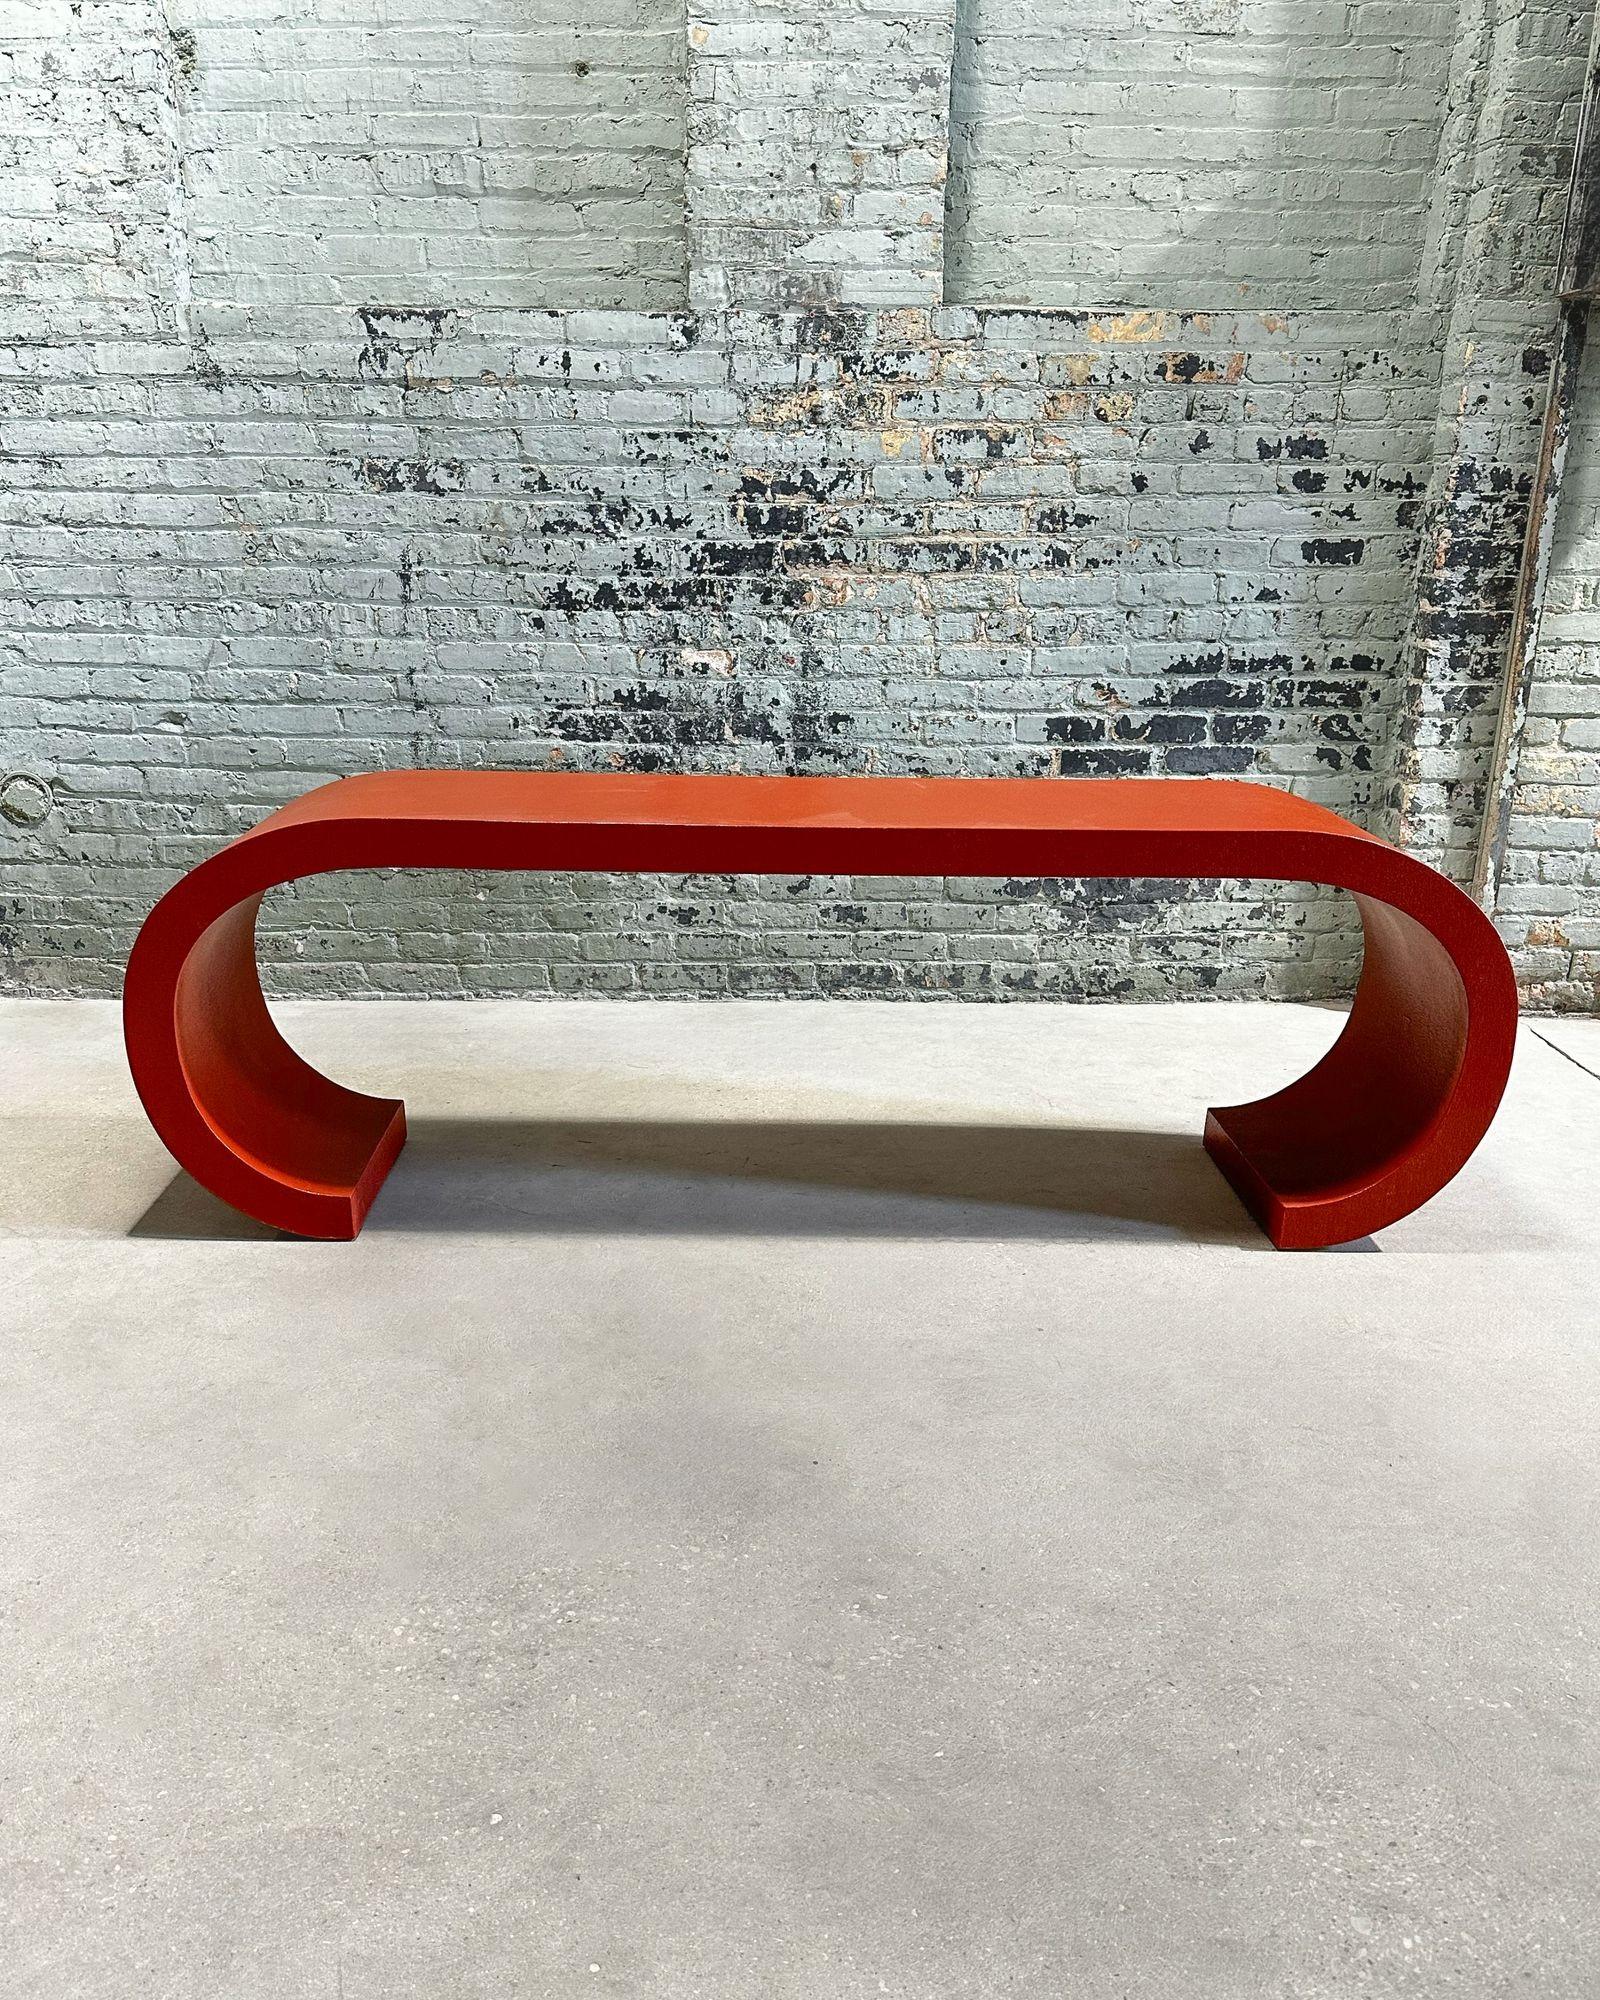 Sculptural Waterfall Grasscloth Console, 1970. Original. Color customization available.
Measures 83.5